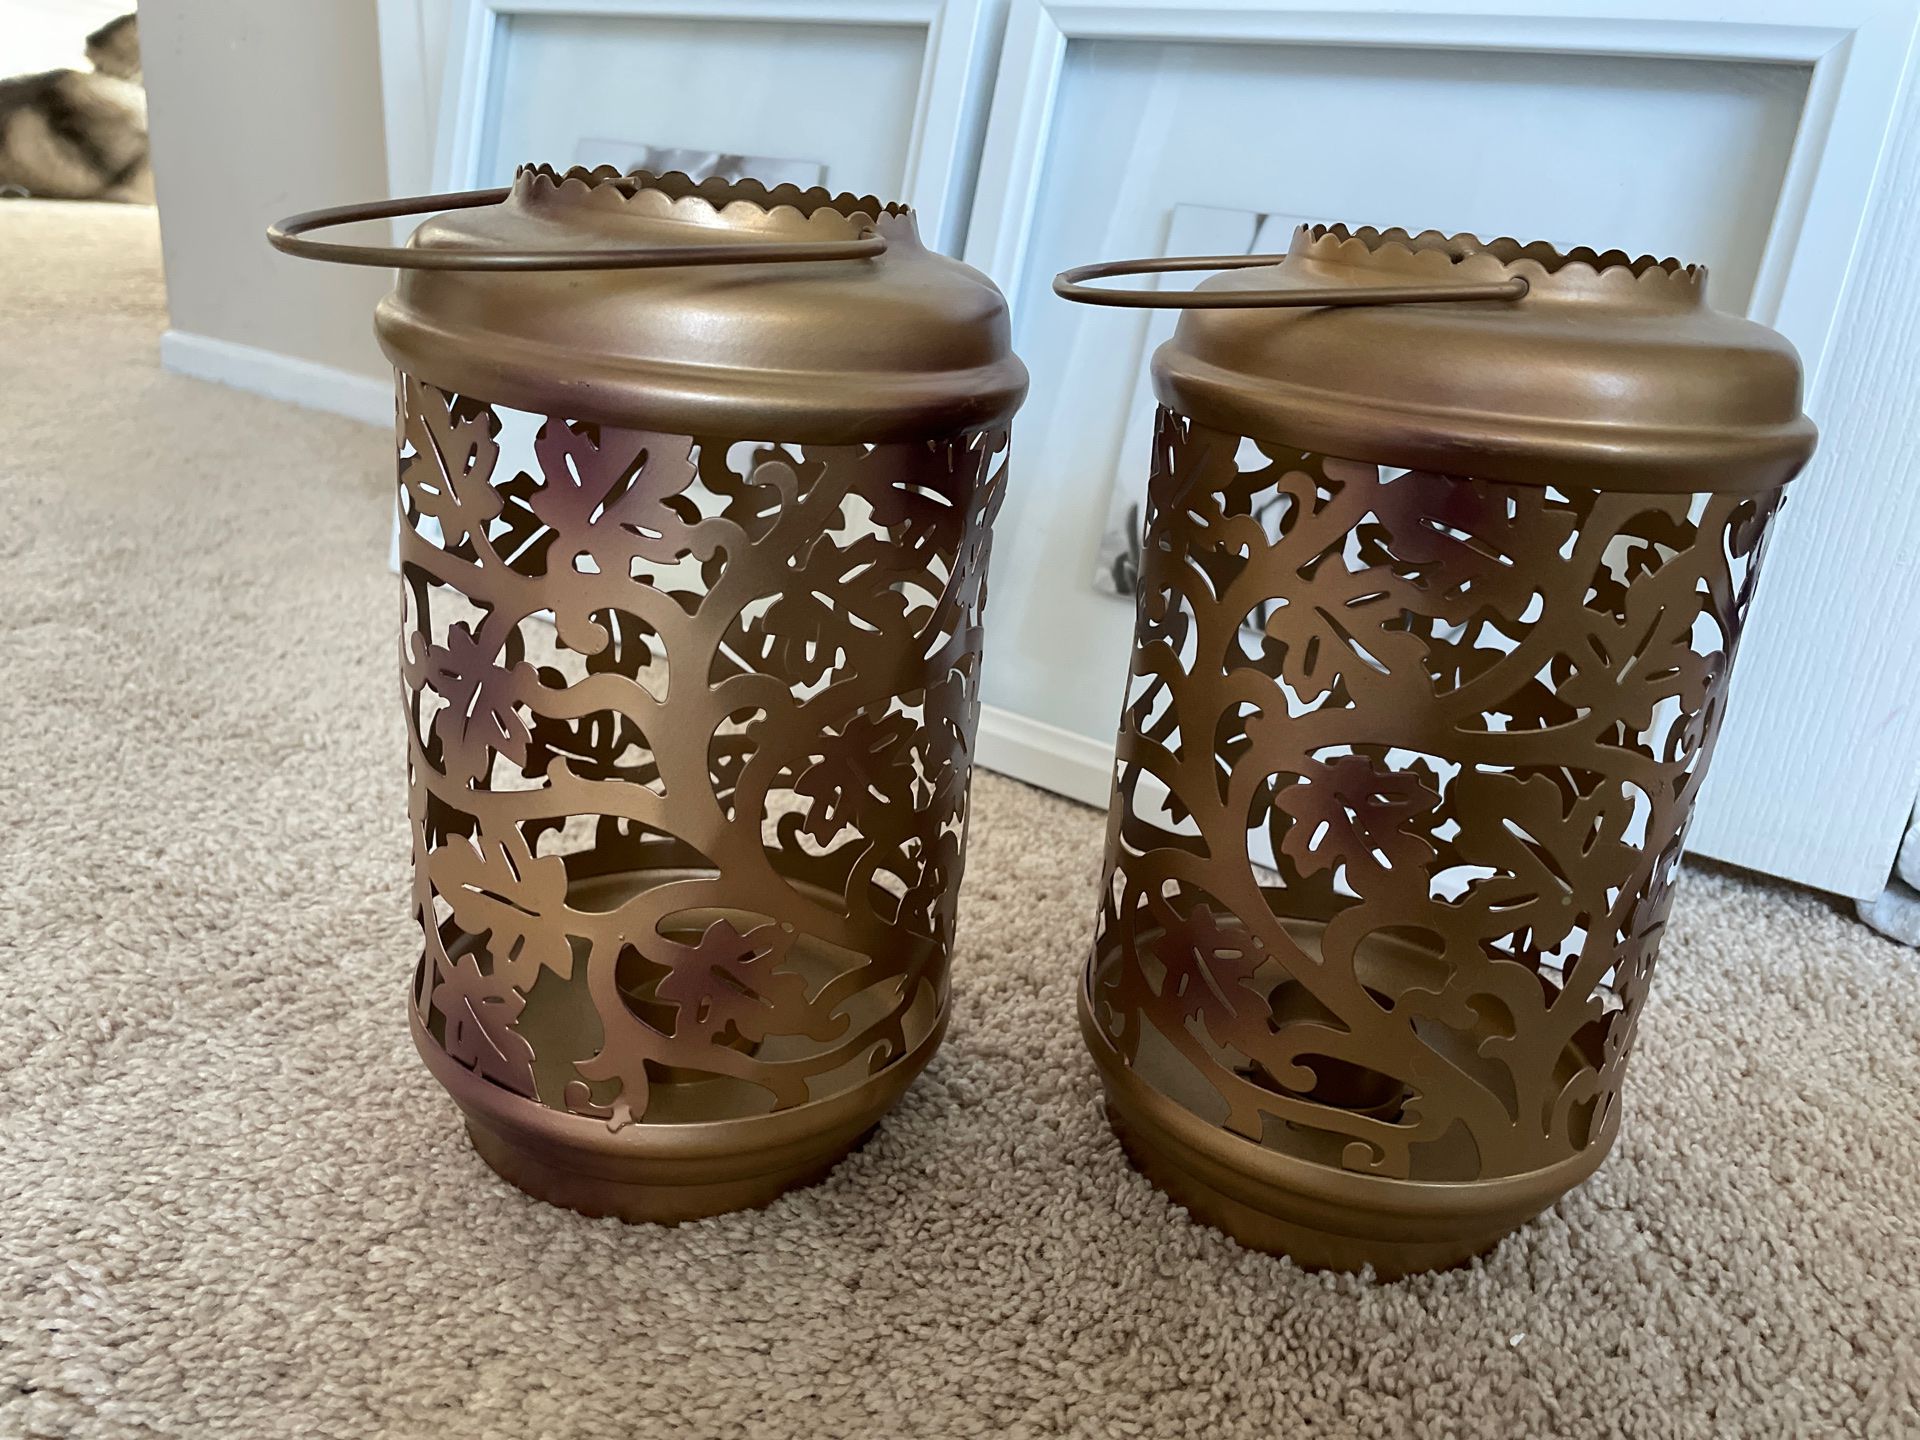 2 Gold lantern candle holders for decor! $5 both